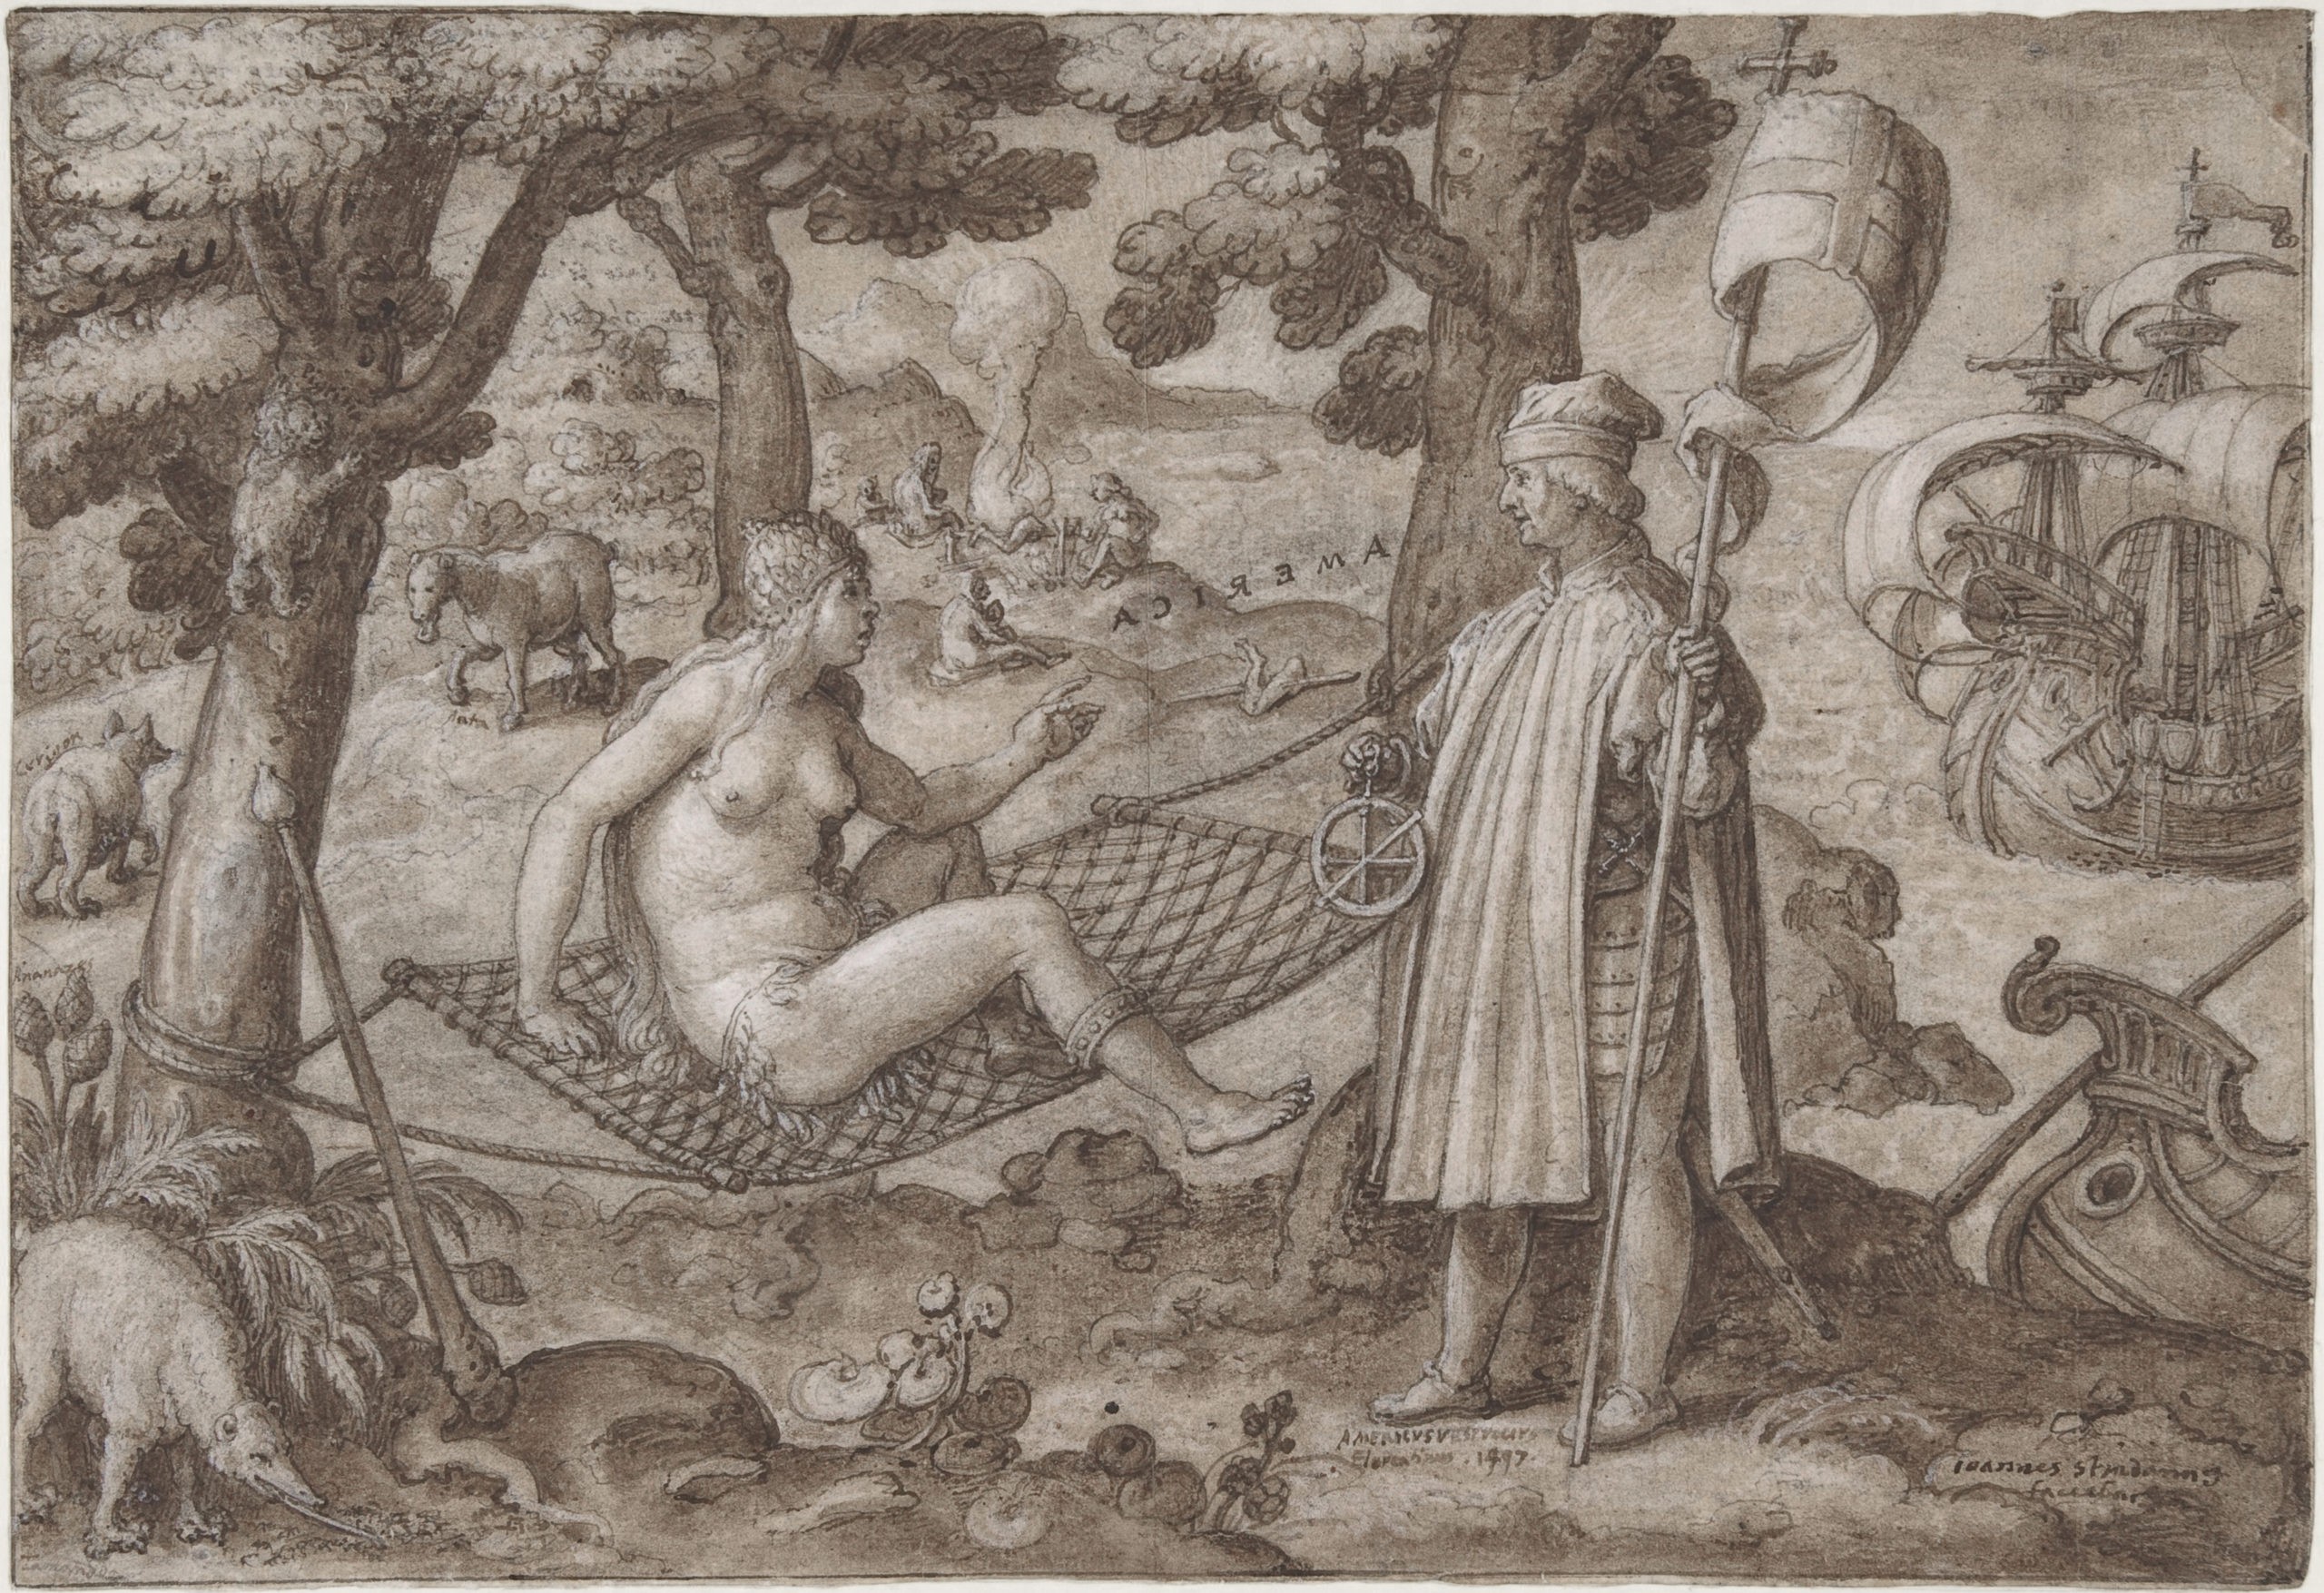 Johannes Stradanus (Jan van der Straet), "The Discovery of America," c. 1587–89, Pen and brown ink, brown wash, heightened with white, over black chalk, 19 x 26.9 cm (<a href="http://www.metmuseum.org/art/collection/search/343845">The Metropolitan Museum of Art</a>)